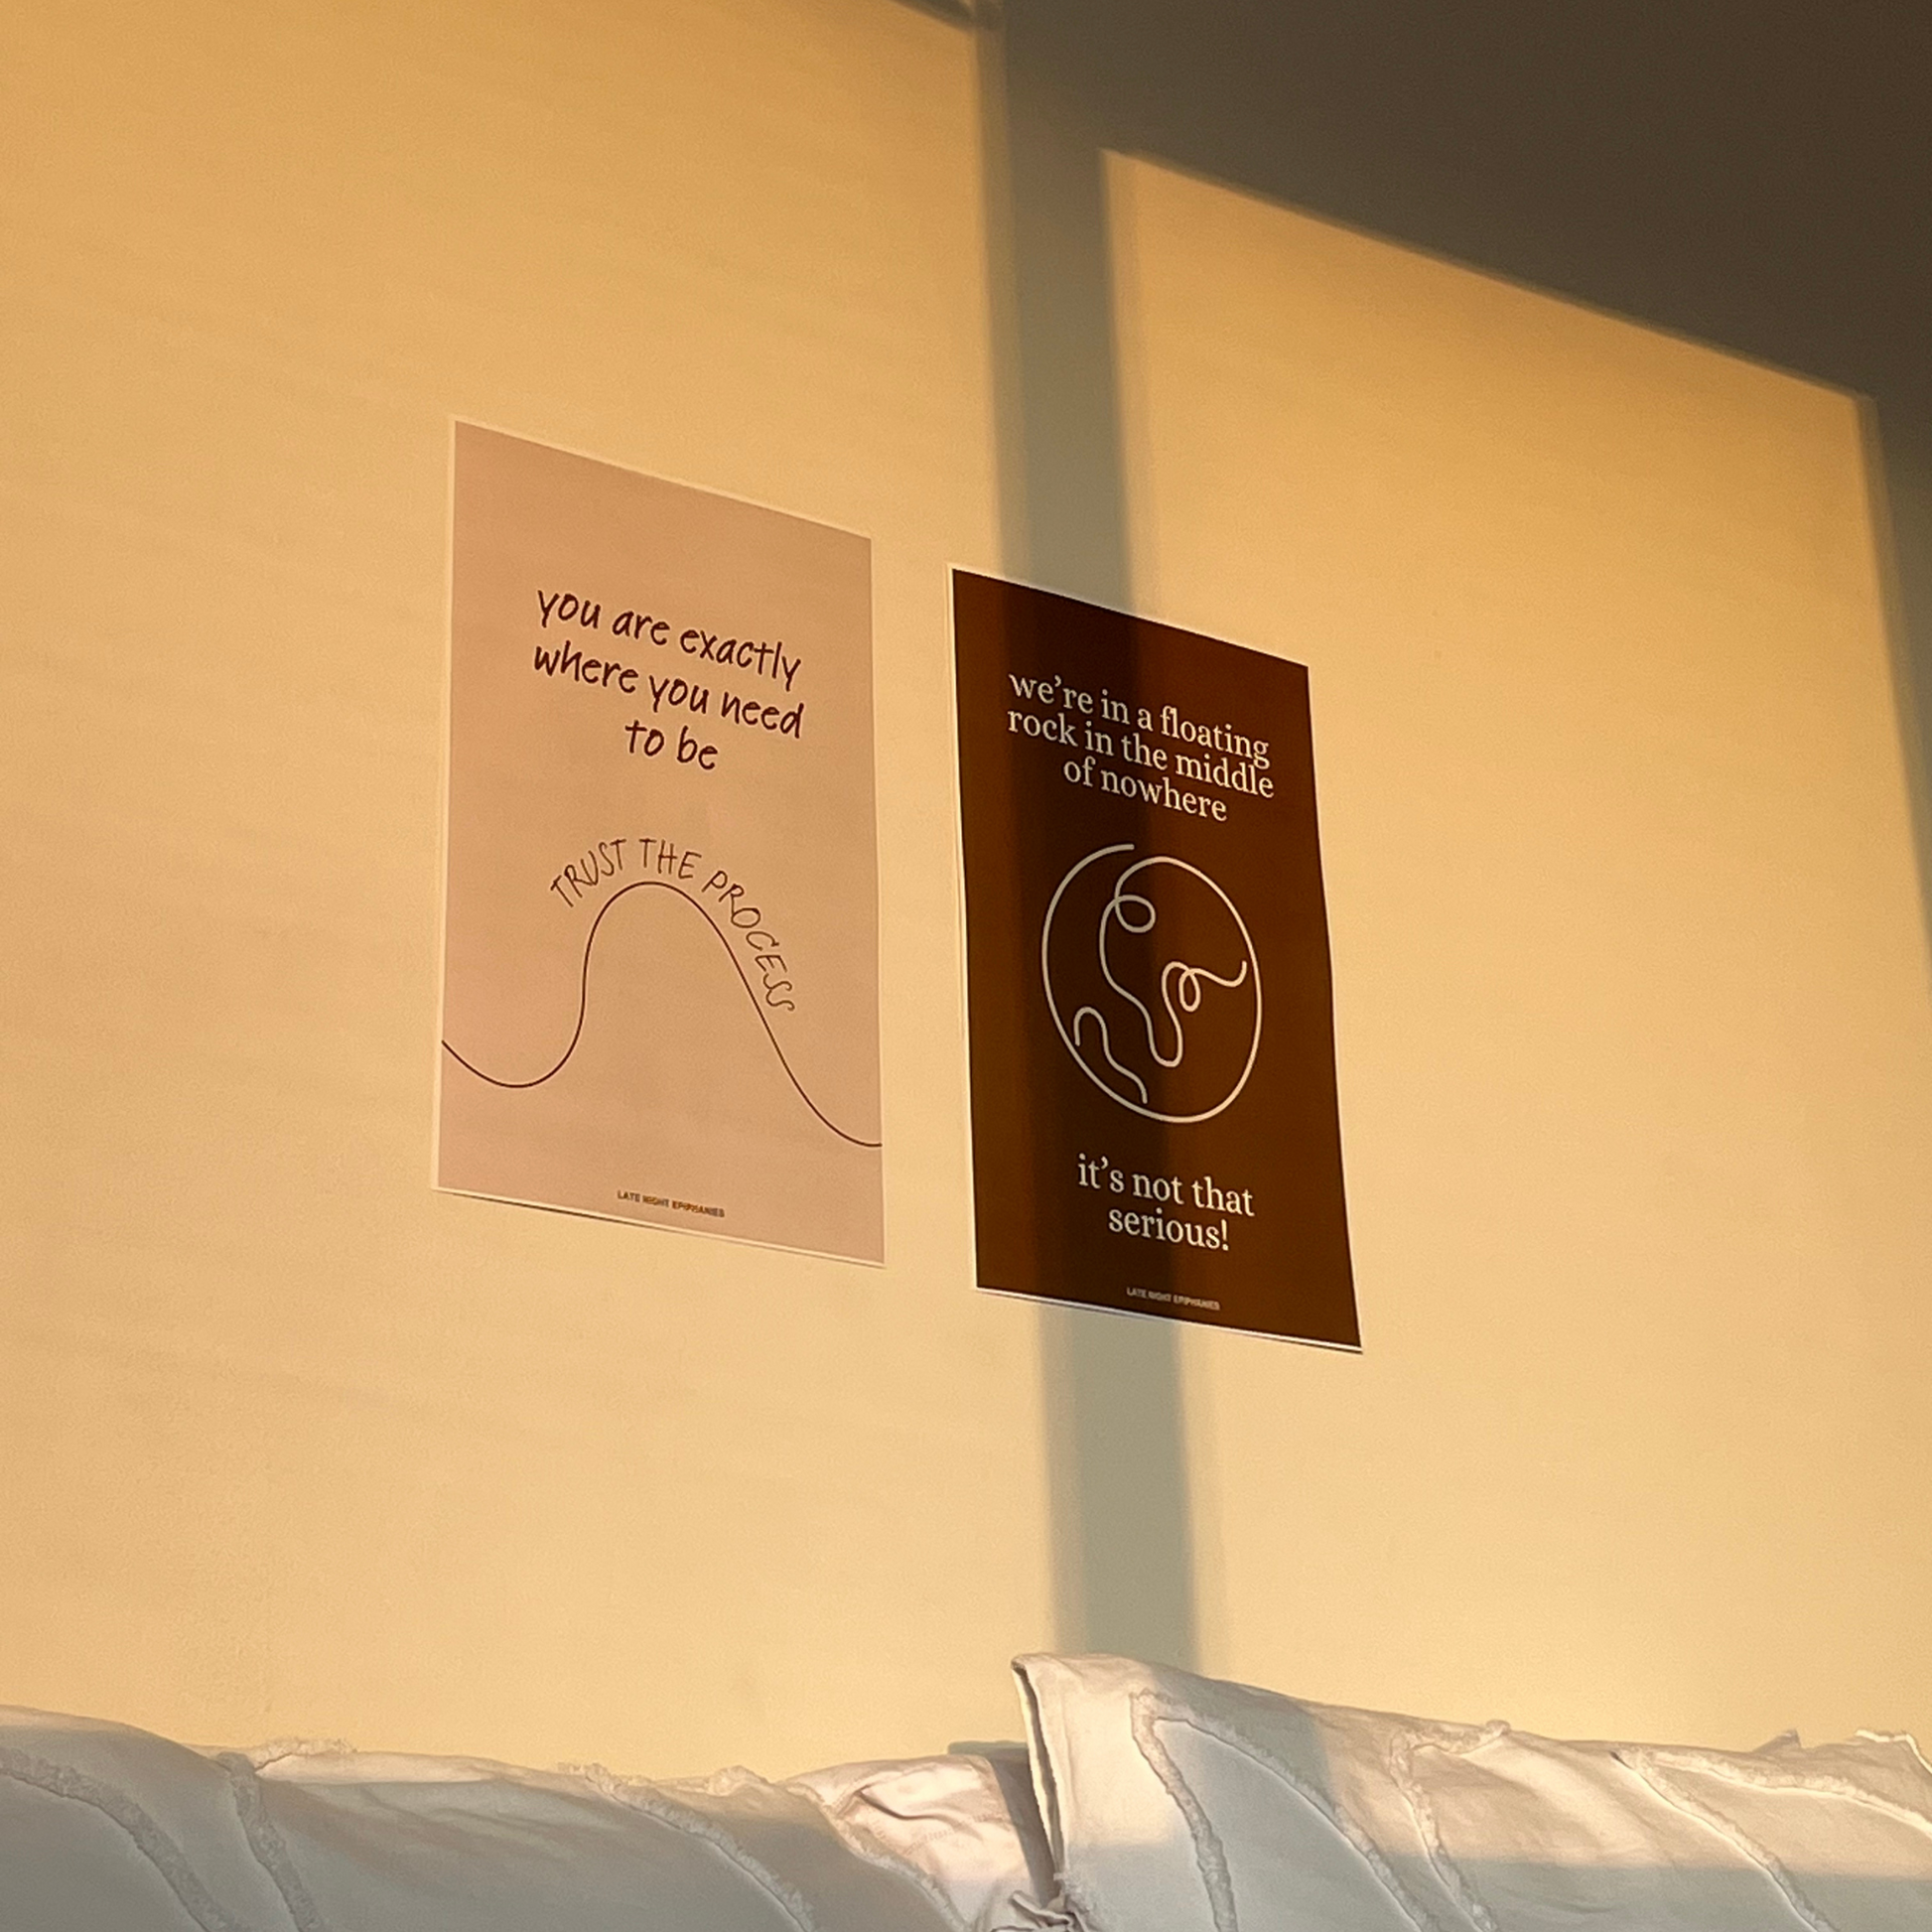 Image of two posters in a bedroom wall during golden hour. One is beige and says "you are exactly where you need to be, trust the process." The other is brown and says "we're in a floating rock in the middle of nowhere. it's not that serious!"